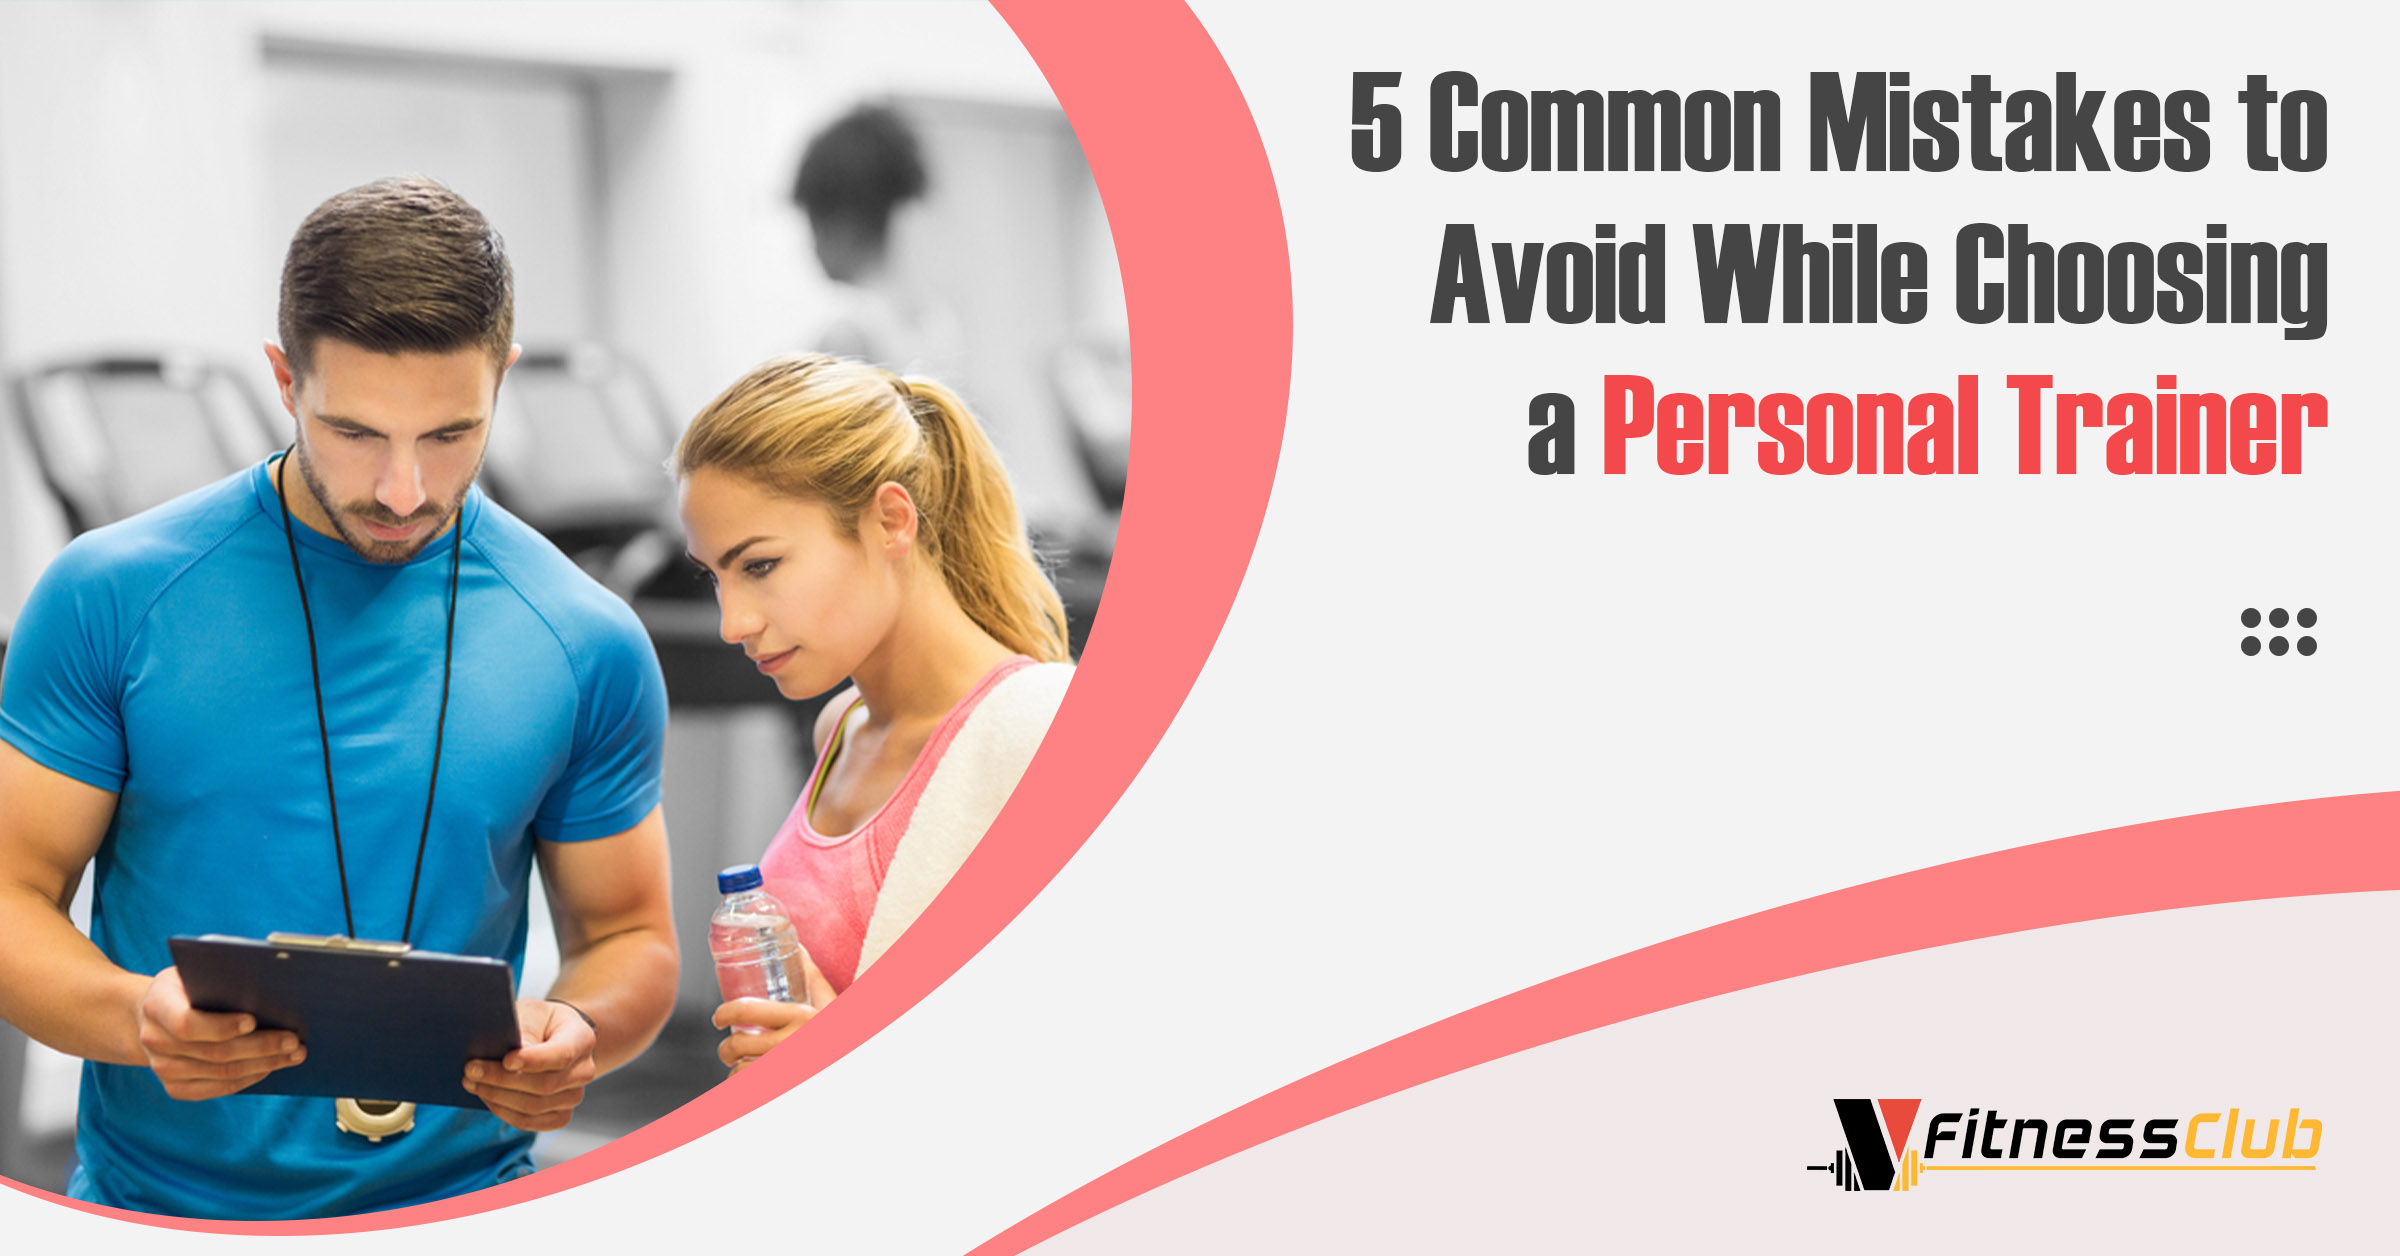 5 Common Mistakes to Avoid While Choosing a Personal Trainer